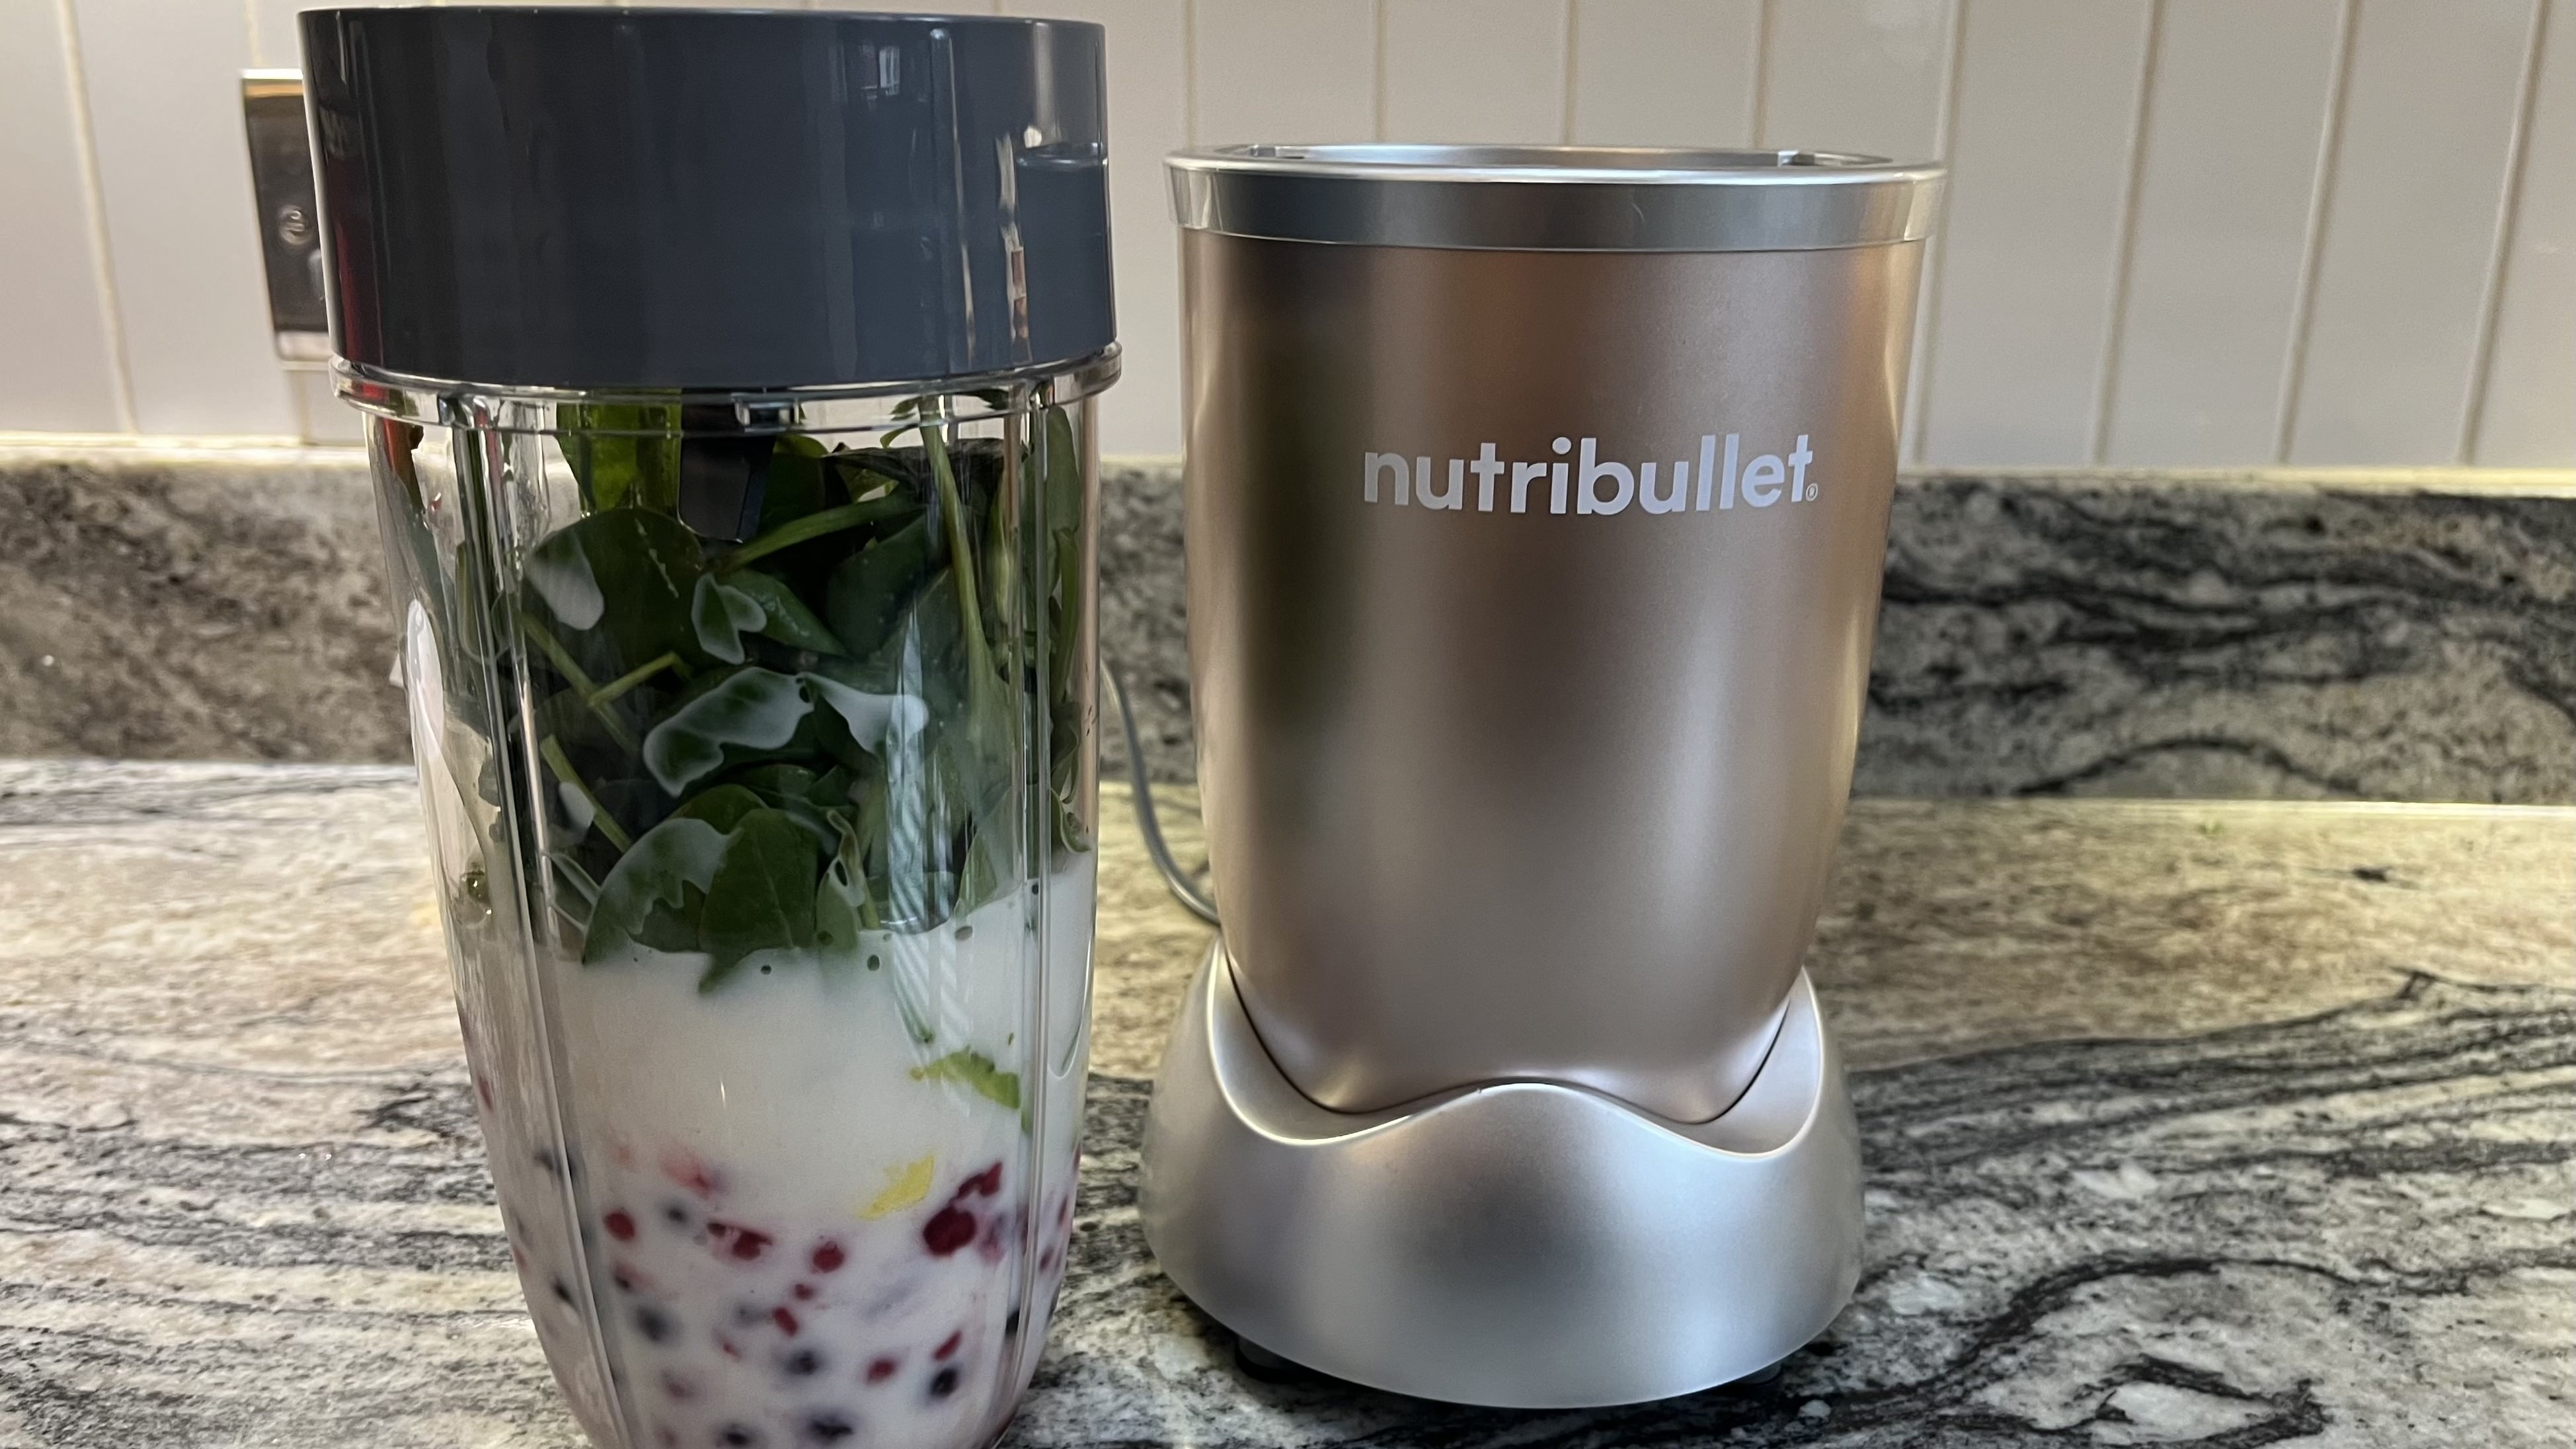 Nutribullet Pro 900 smoothie ingredients in the chamber